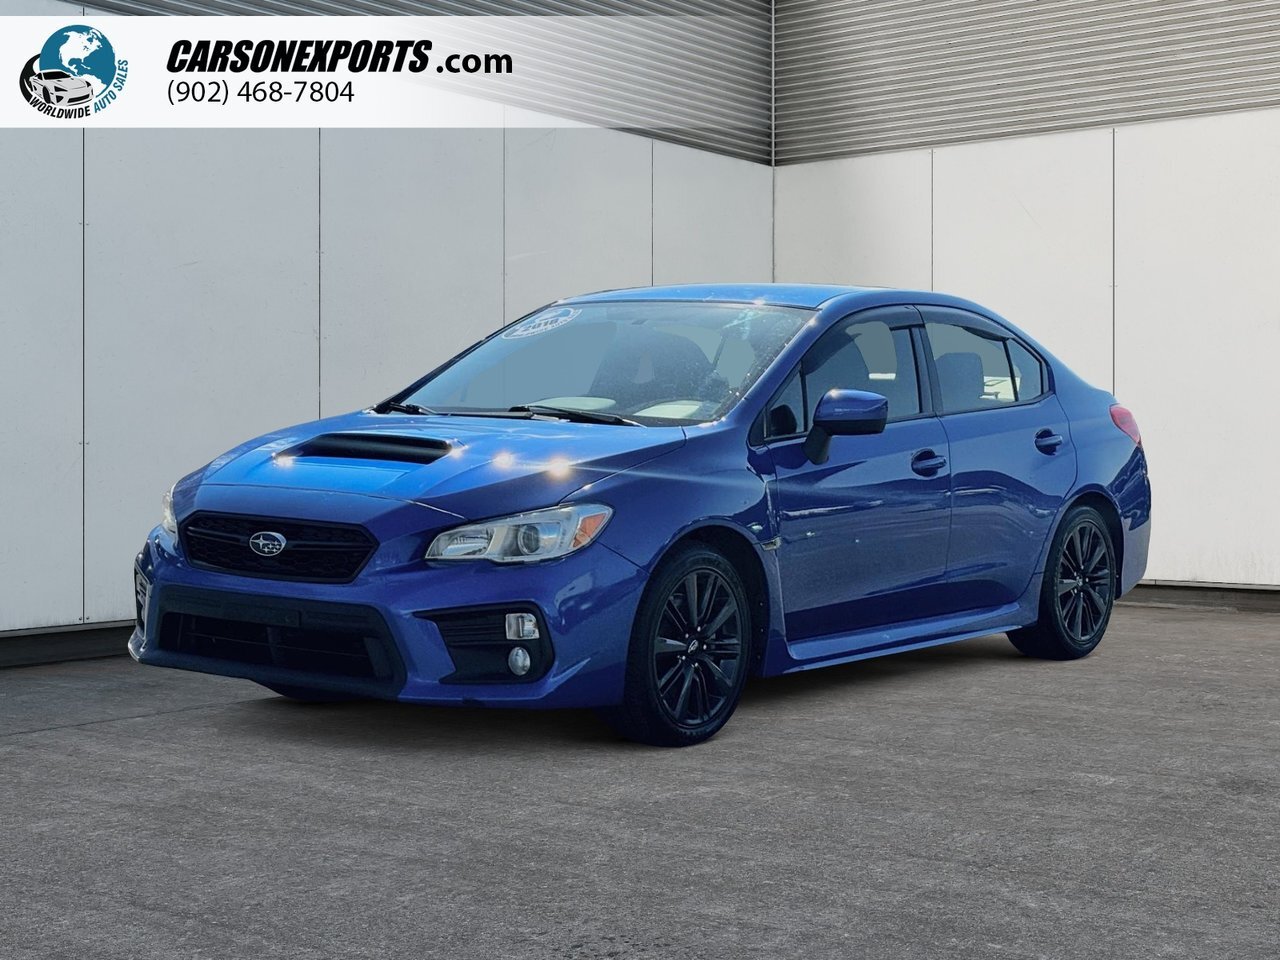 2018 Subaru WRX Base The best place to buy a used car. Period.